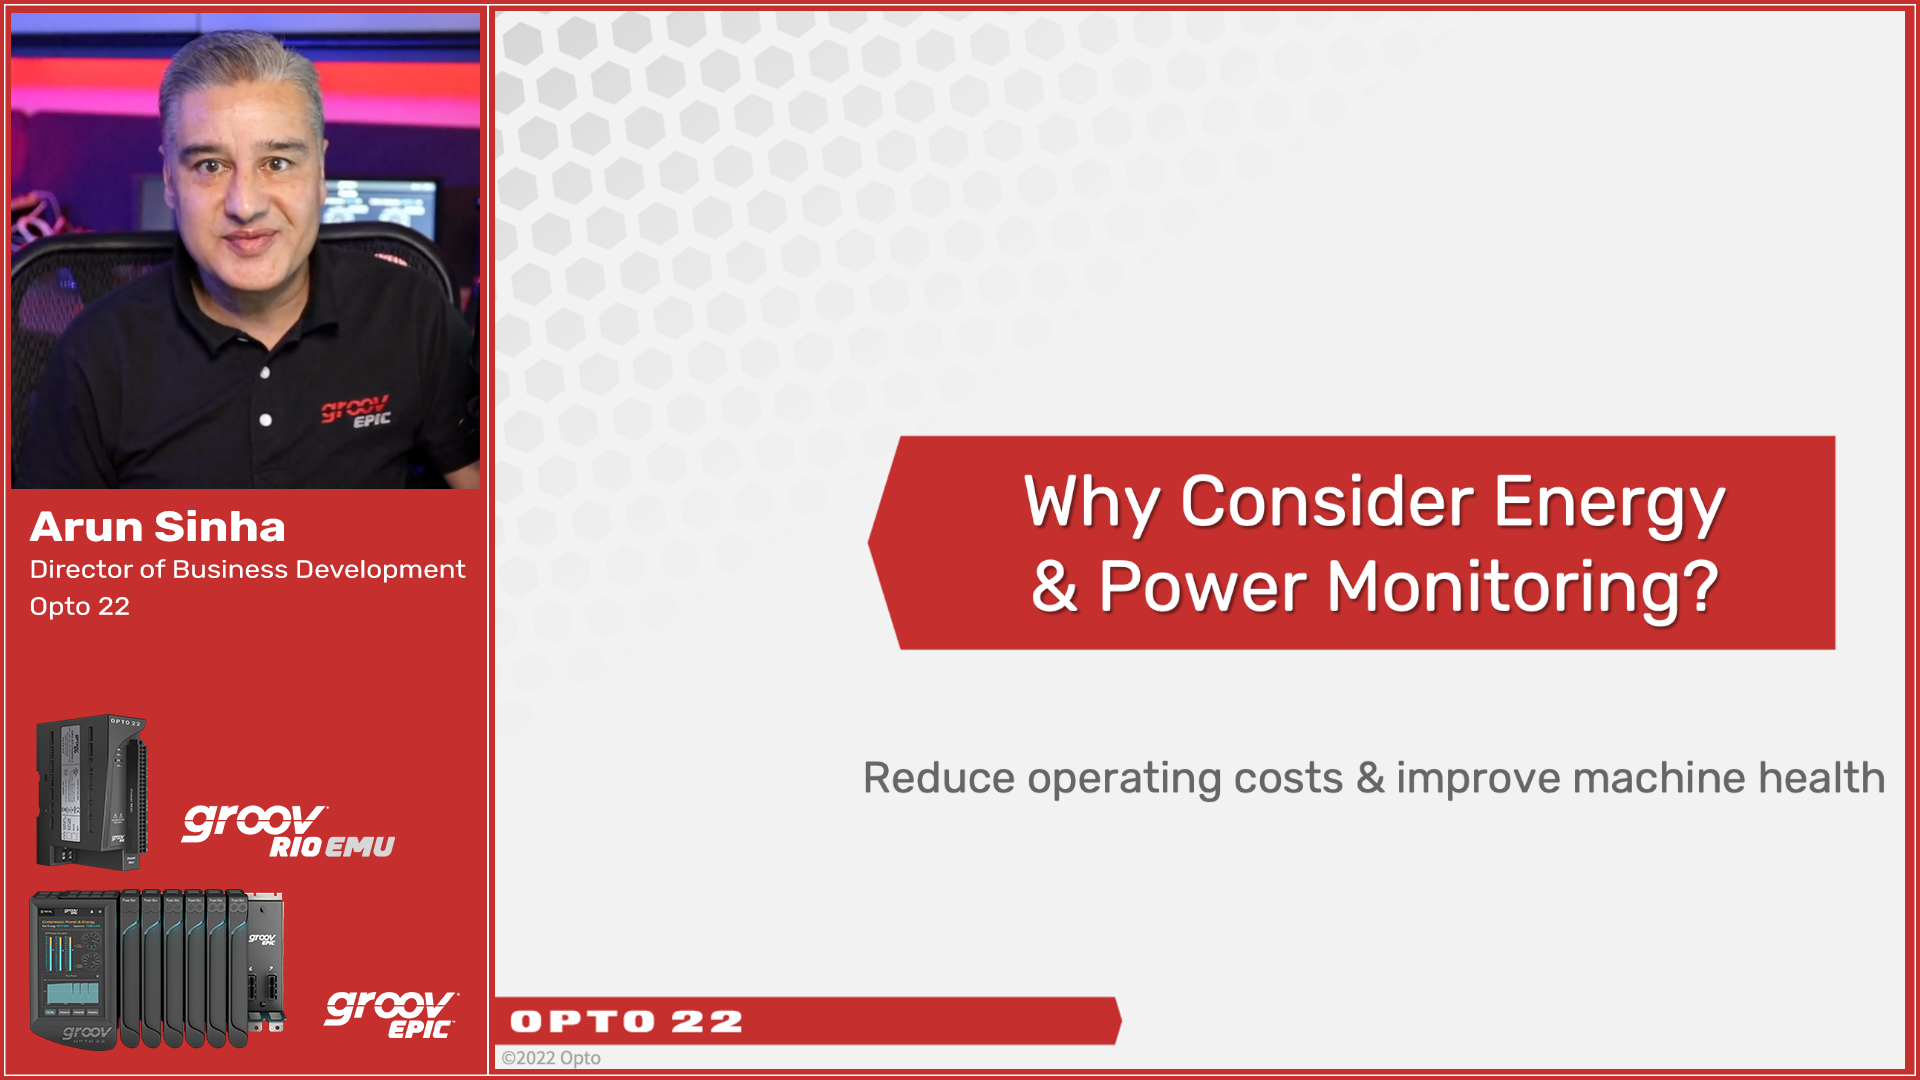 Learn the benefits of power and energy monitoring